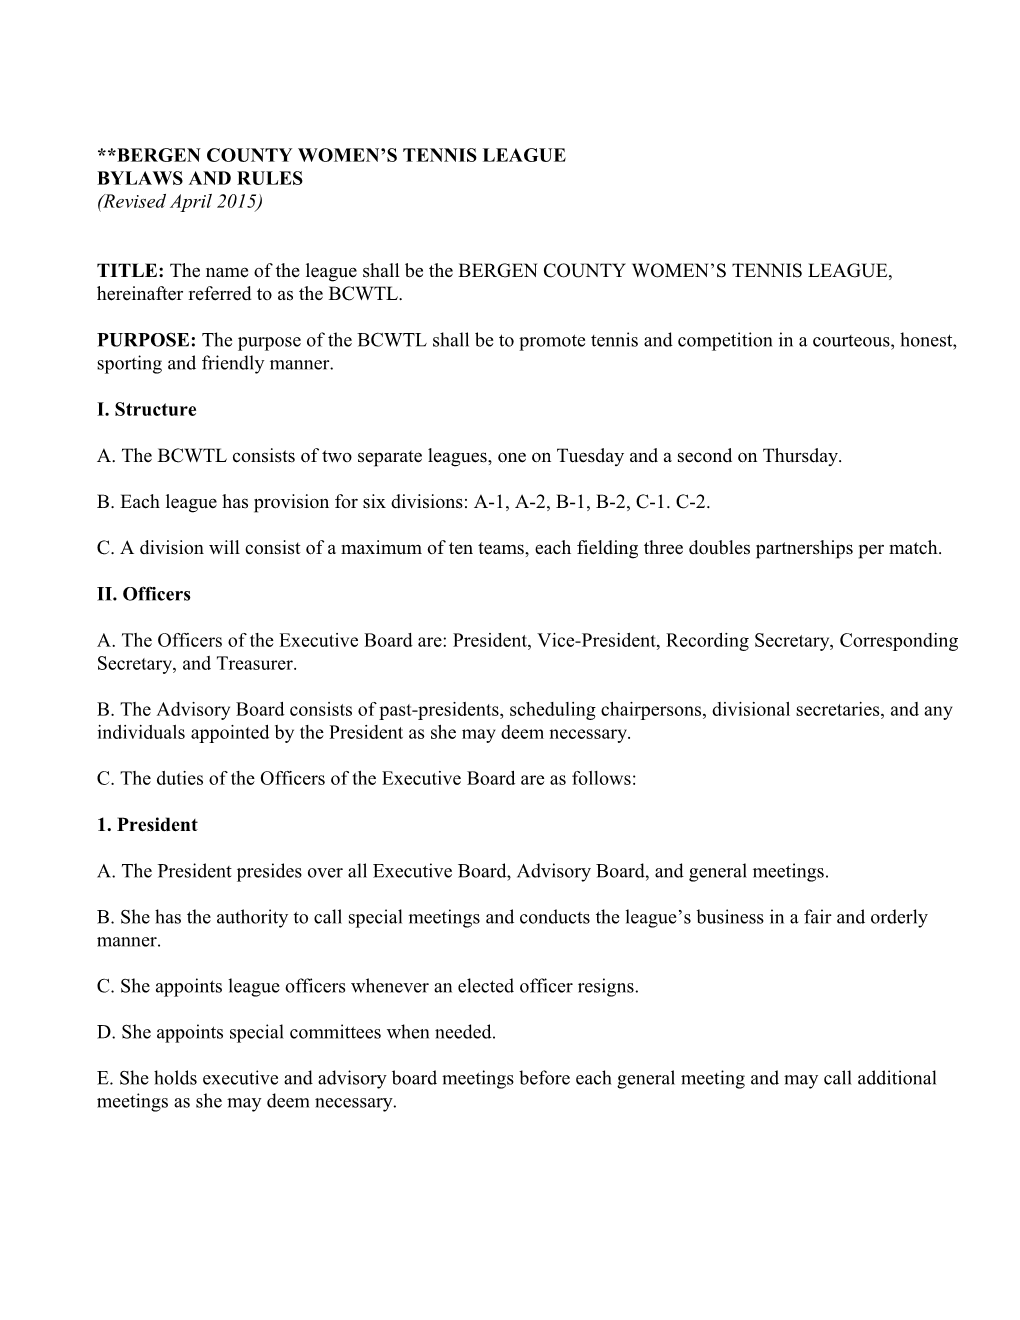 BERGEN COUNTY WOMEN S TENNIS LEAGUE BYLAWS and RULES (Revised April 2015)